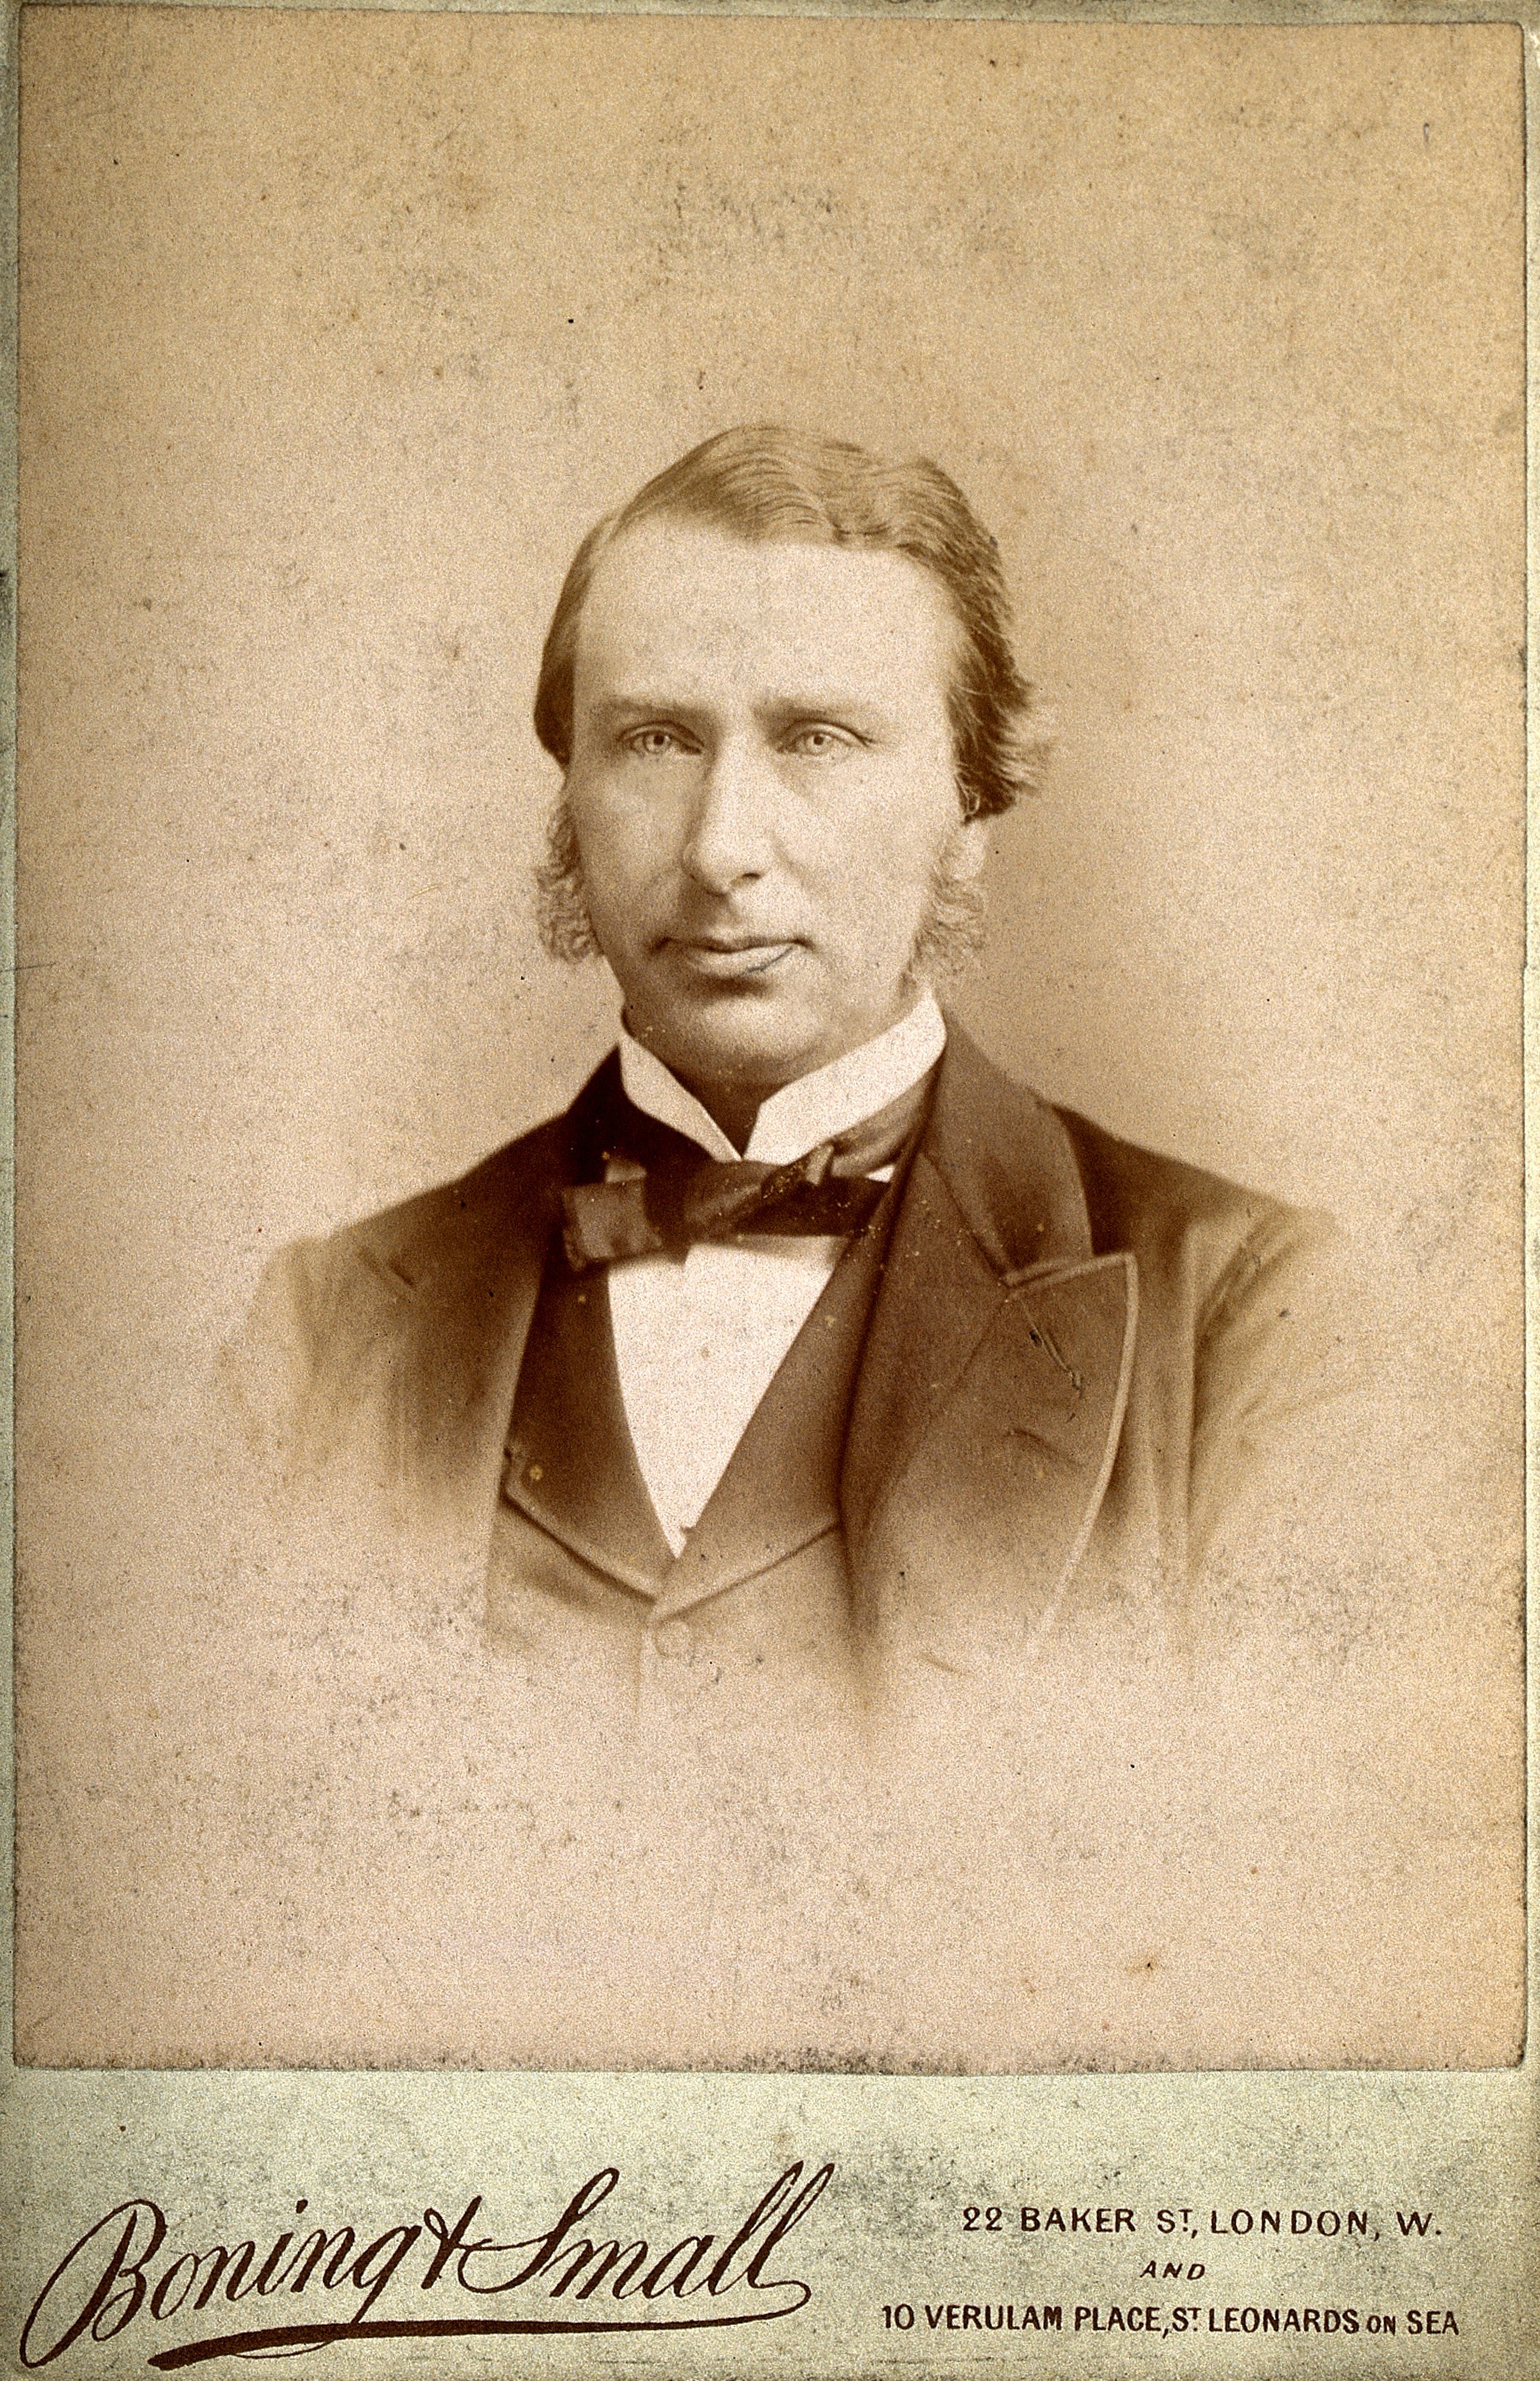 An unidentified man, possibly called Langton. Photograph by Wellcome V0027372